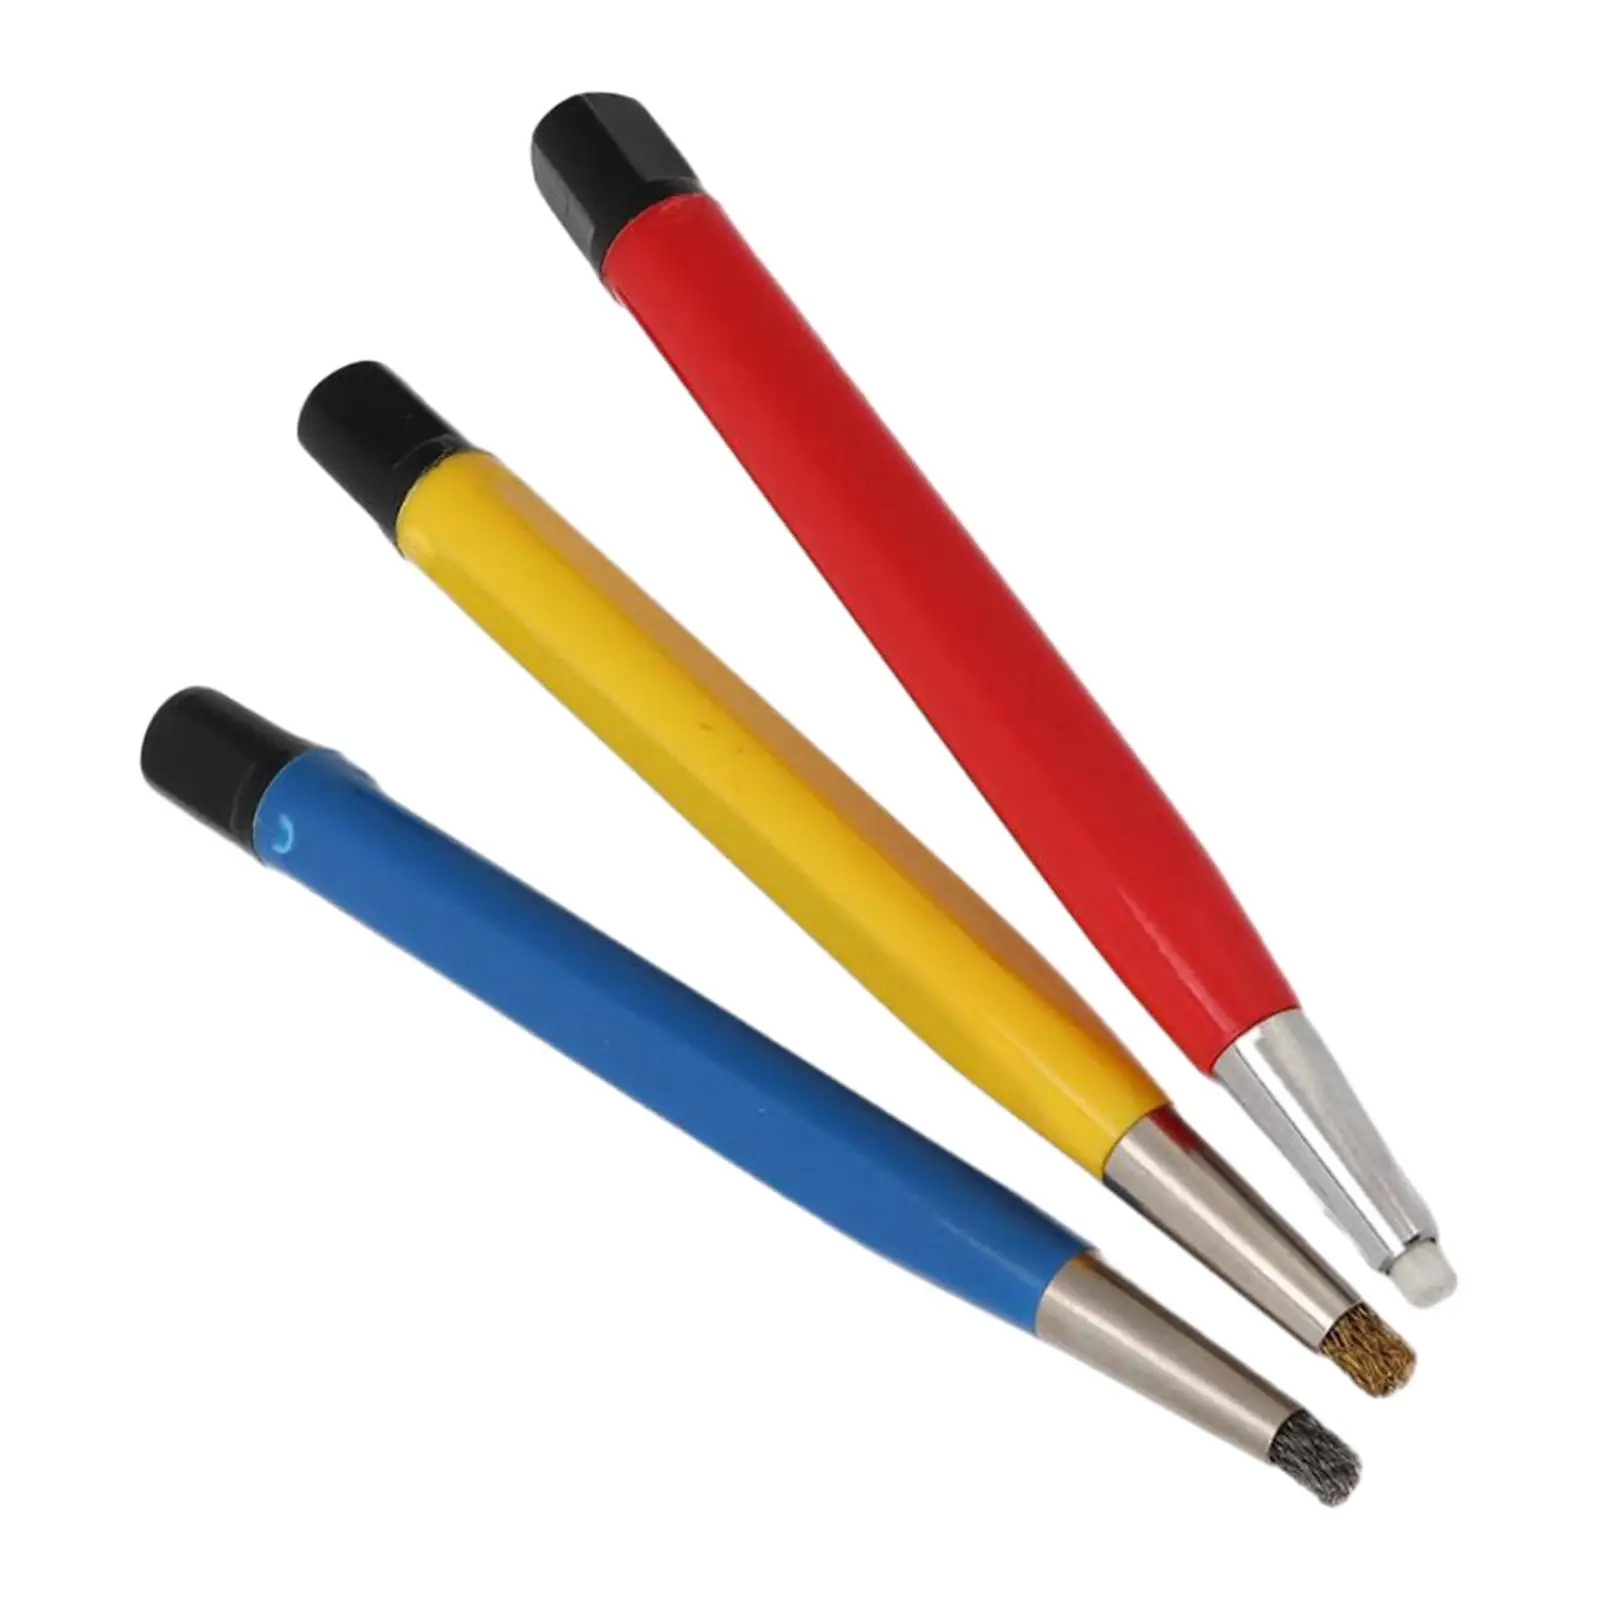 3Pcs Scratch Brush Pen Set Removing Corrosion Rust Clean Tool Watch Repair Dirt Remover for Jewelry Electrical Circuit Boards